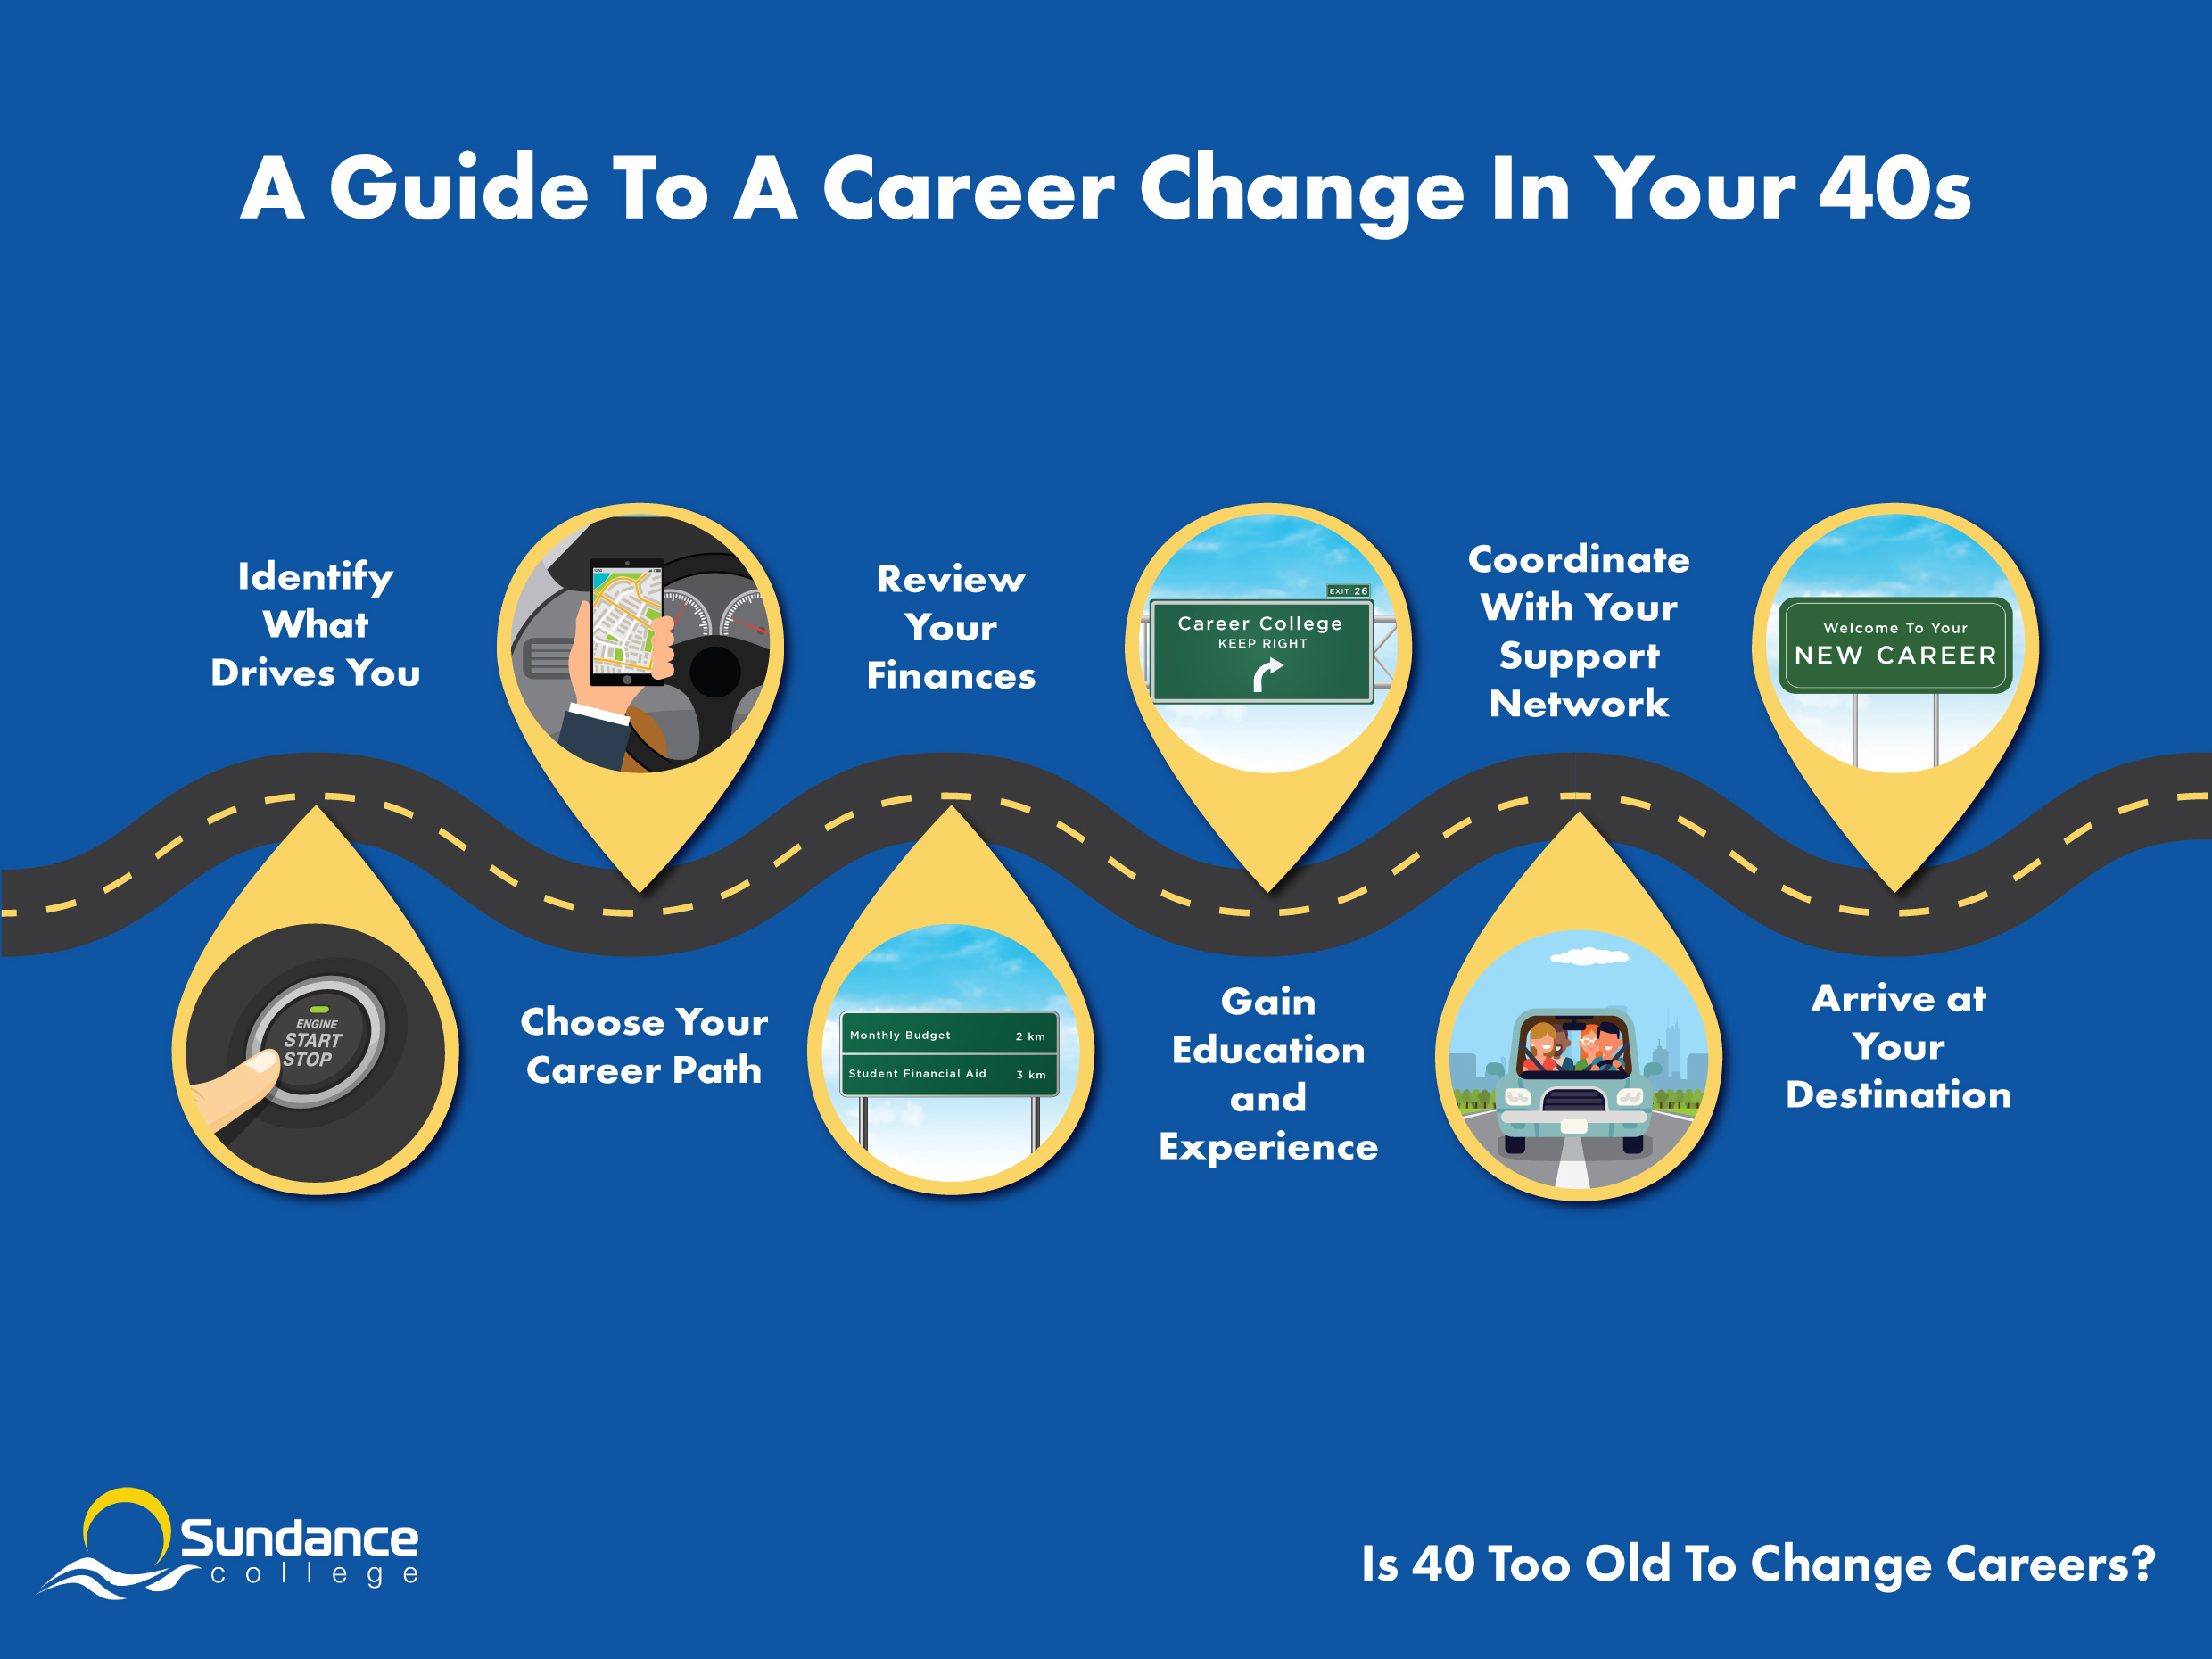 infographic depicting a guide to a career change in your 40s, including starting with an assessment of what drives you, followed by career navigation, followed by a review of your finances, followed by upskilling at career college, followed by interaction with your career and support networks, followed finally by arriving at your new career